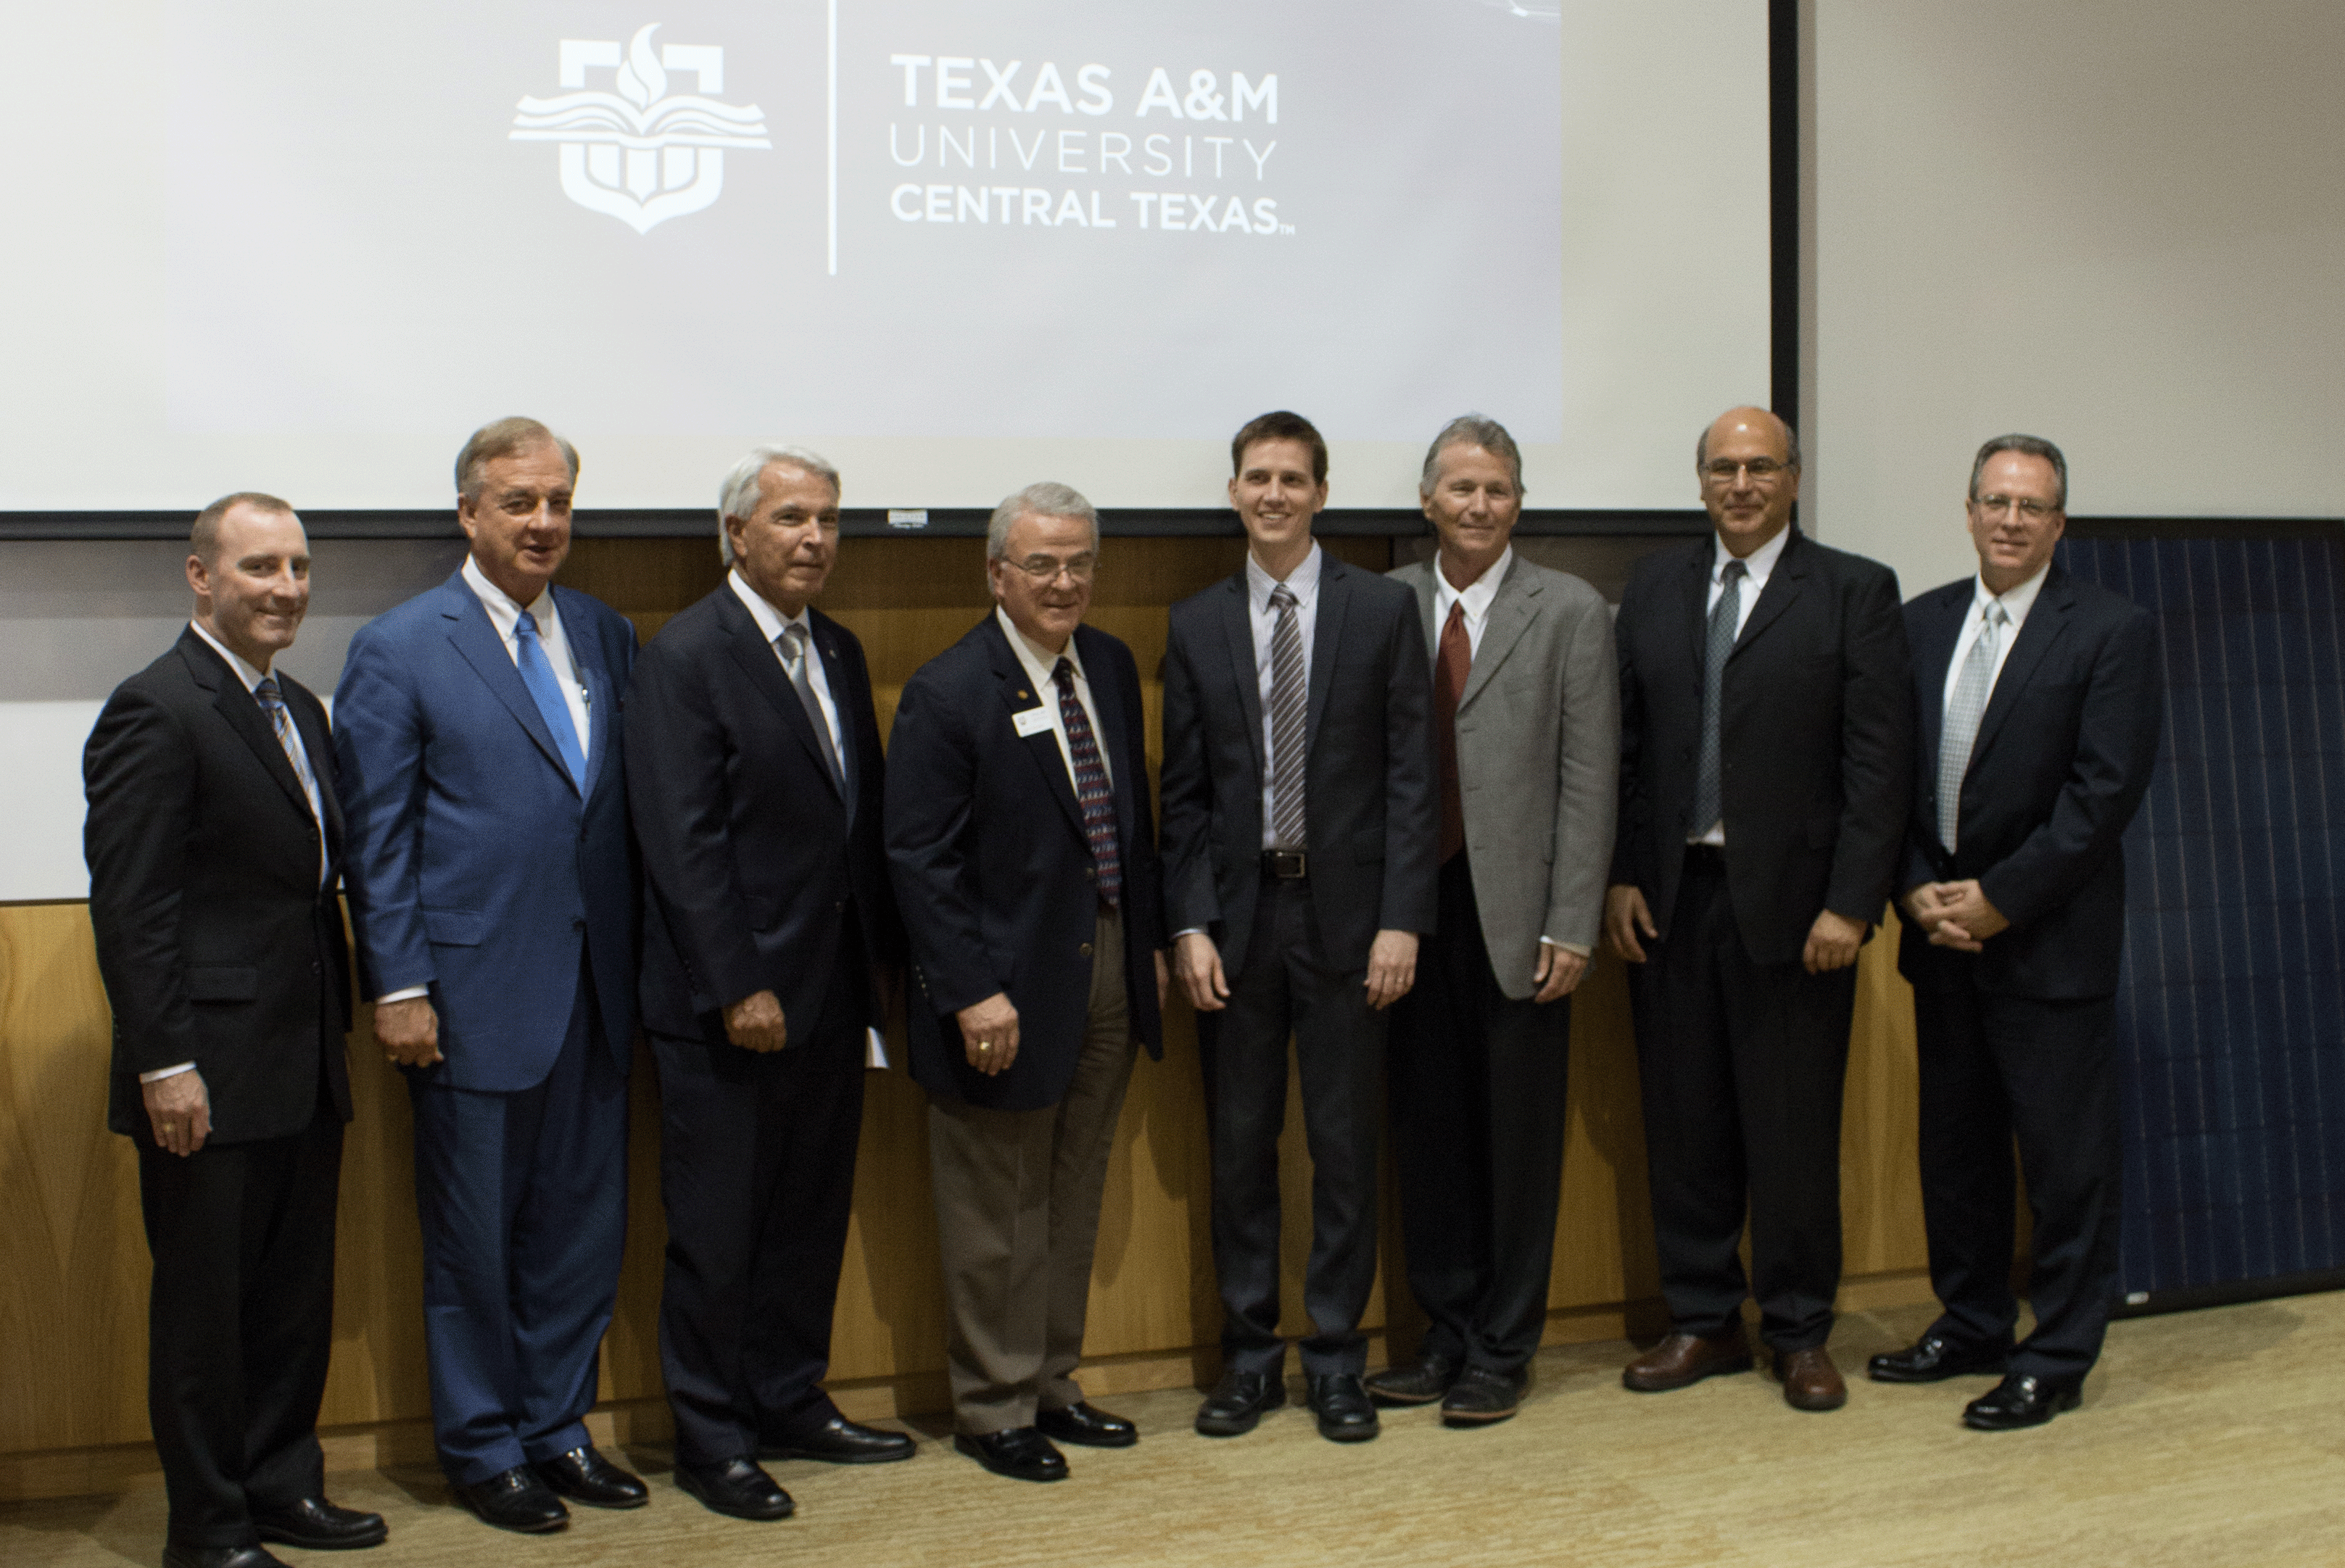 Dr. Jon Mogford, Vice Chancellor for Research, Texas A&M System; Sharp; Jim Yeonopolus, Chancellor, Central Texas College; Nigliazzo; Harvey; Bruce Mercy, Executive Director, The Center for Solar Energy; Lagoudas; and Dr. Russ Porter, Vice President for Research and Economic Development, A&M-Central Texas.